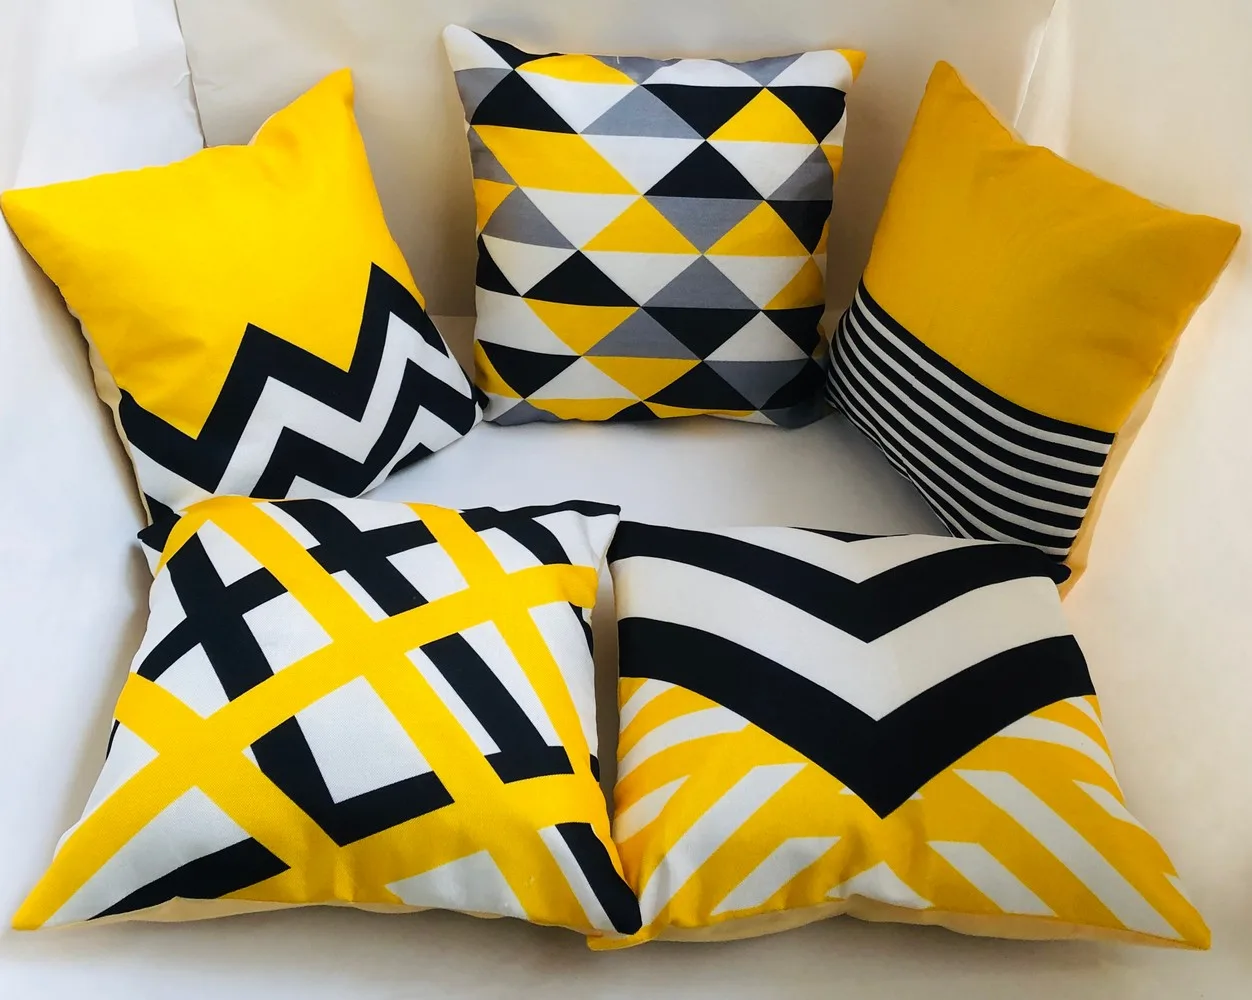 Jute Printed Cushion Cover Abstract Yellow Black, 16x16 inches, Set of 5